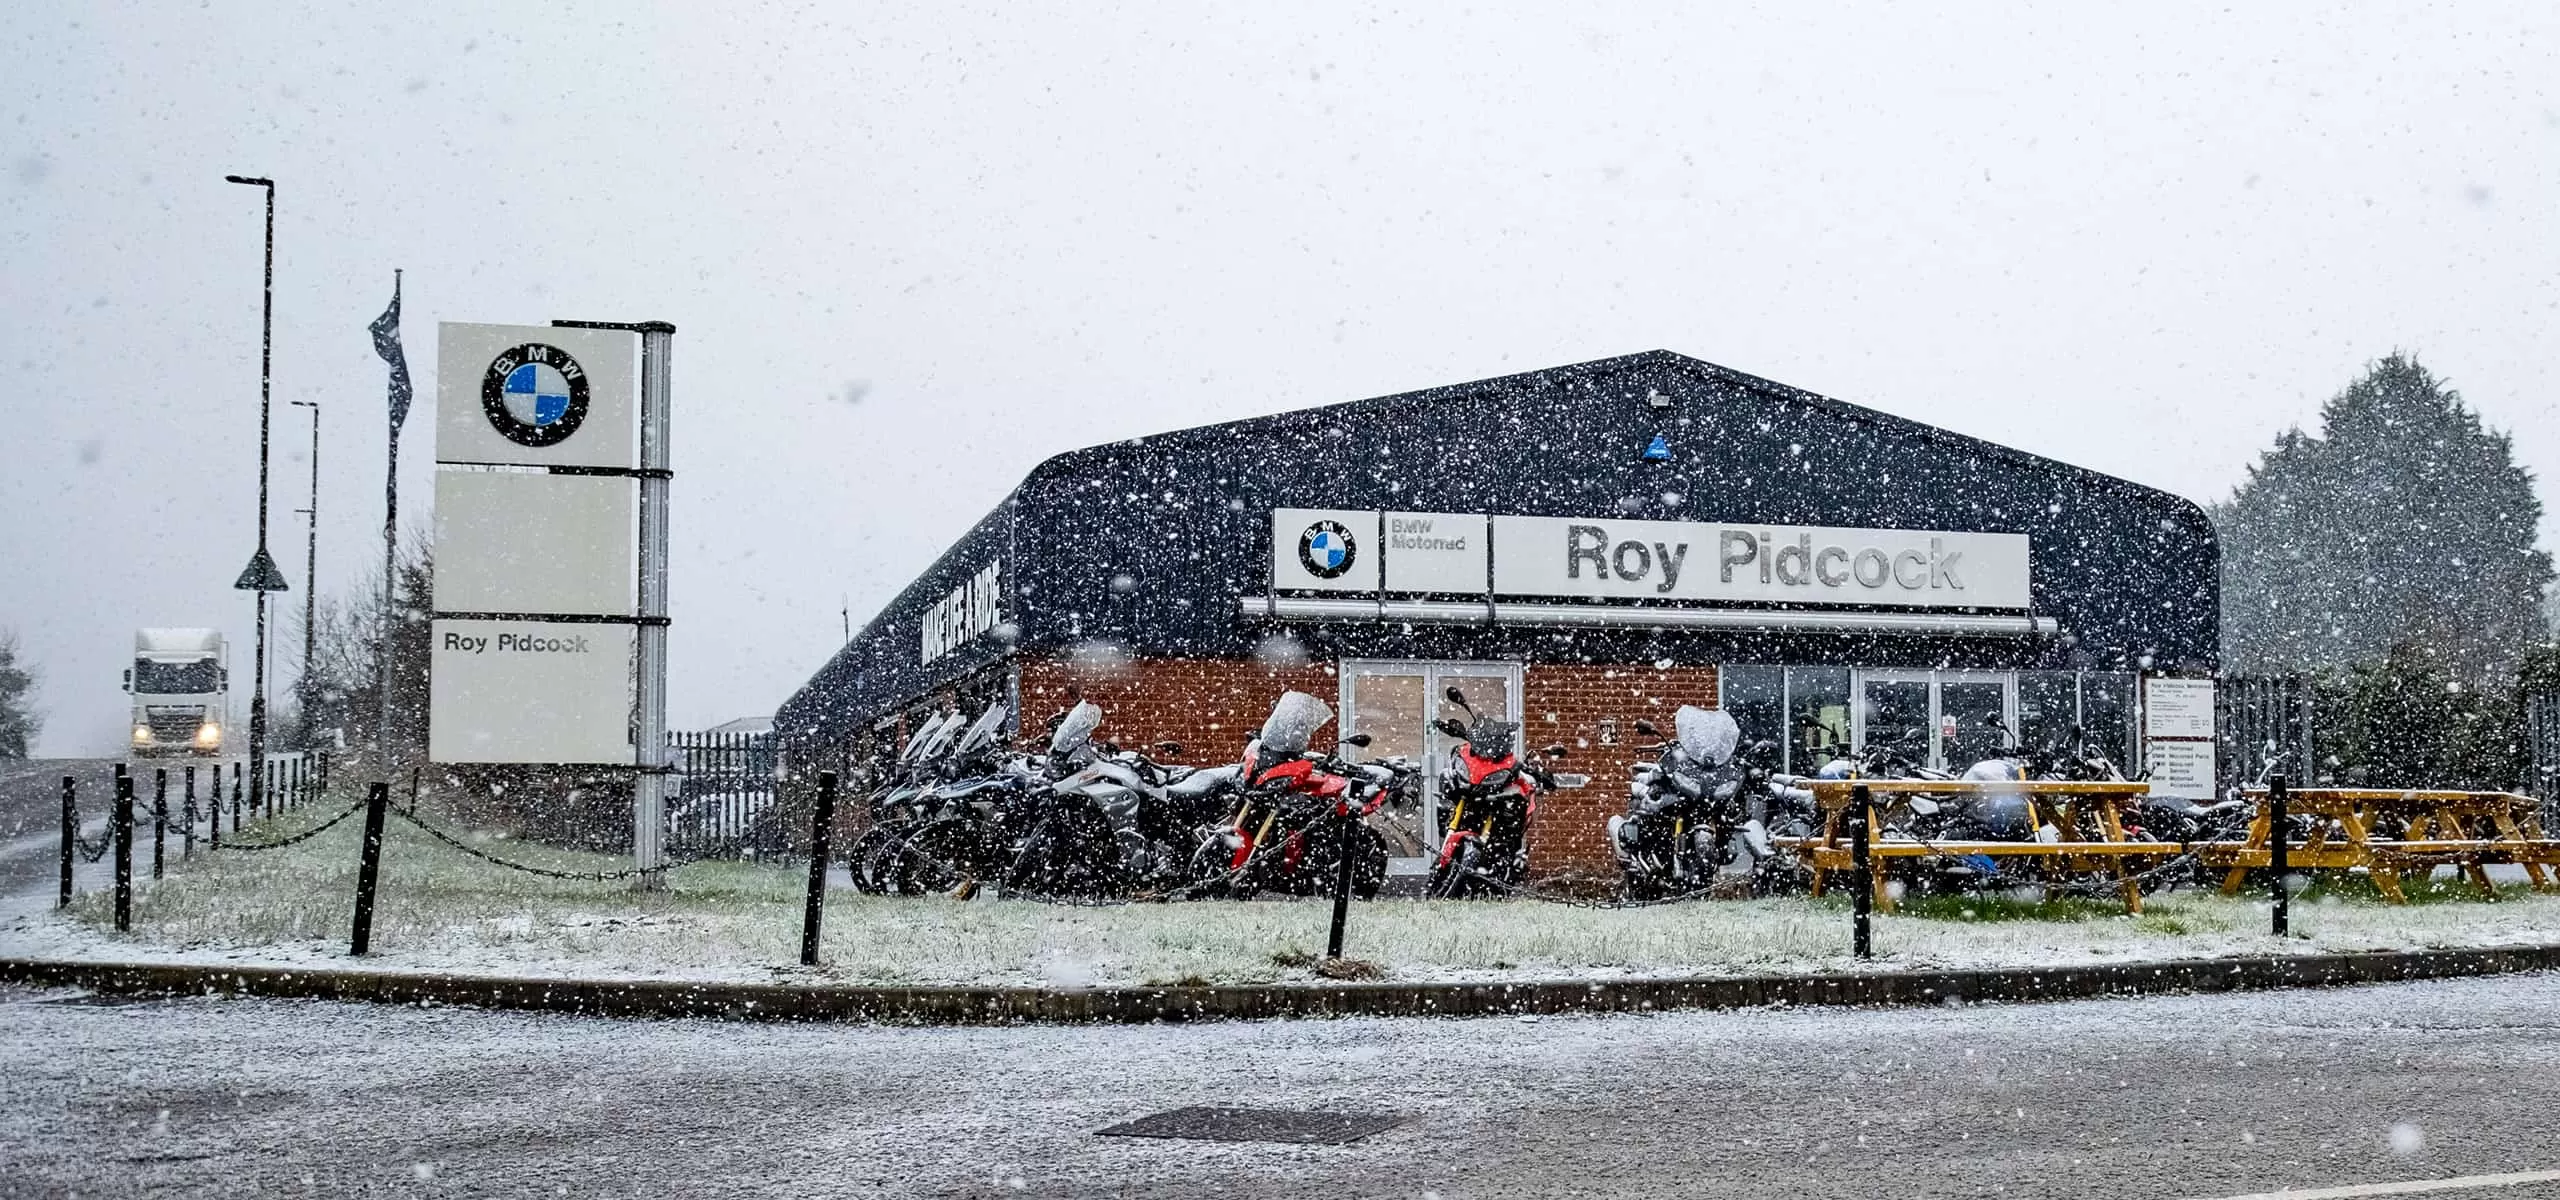 BMW Winter Service Offer at Pidcock Motorcycles in Nottingham